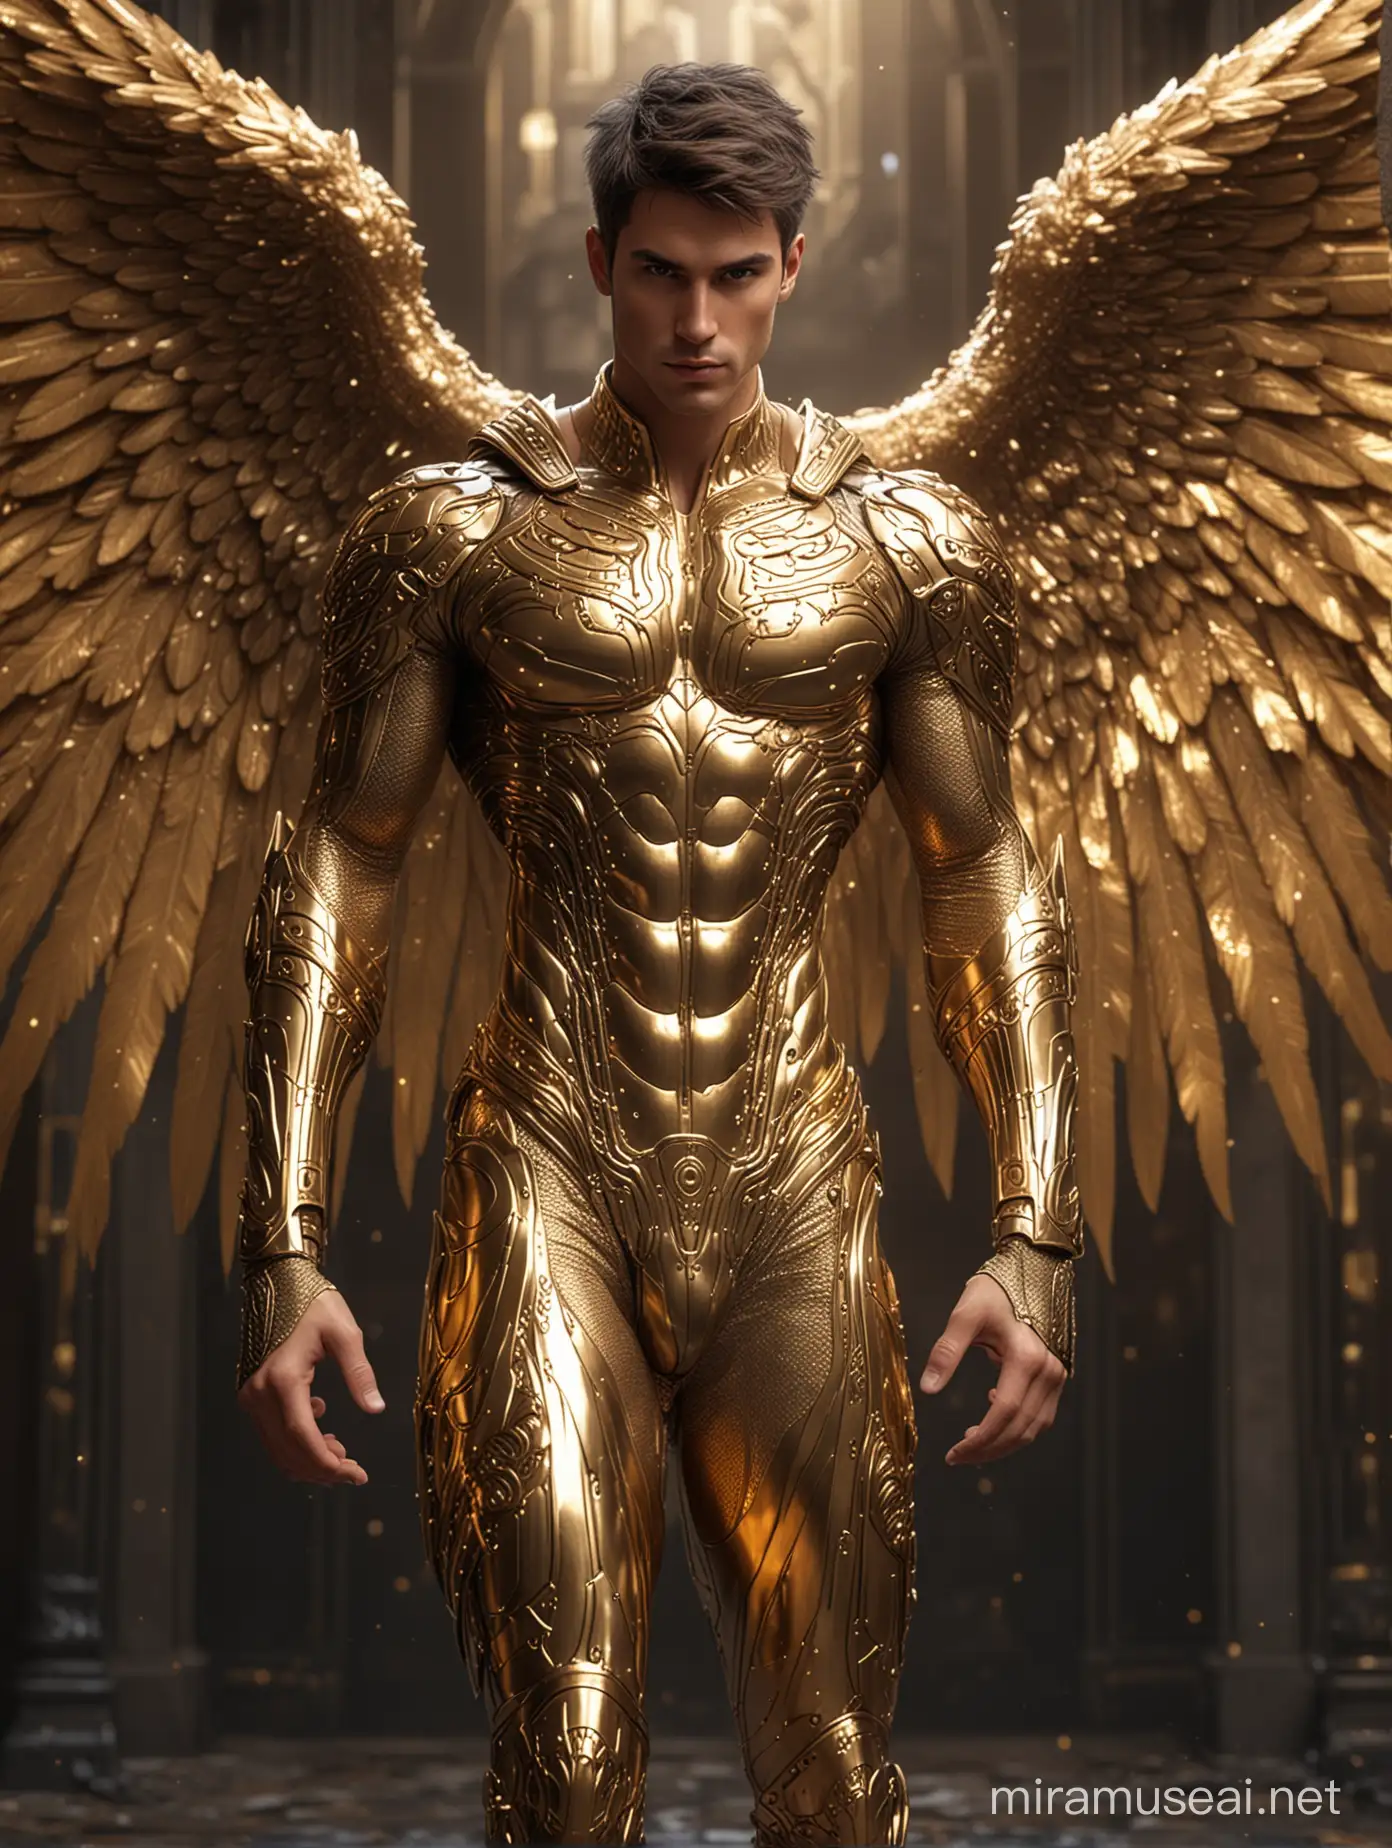 Handsome Masculine Fractal Archangel with Sparkling Wings and Gold Bodysuit